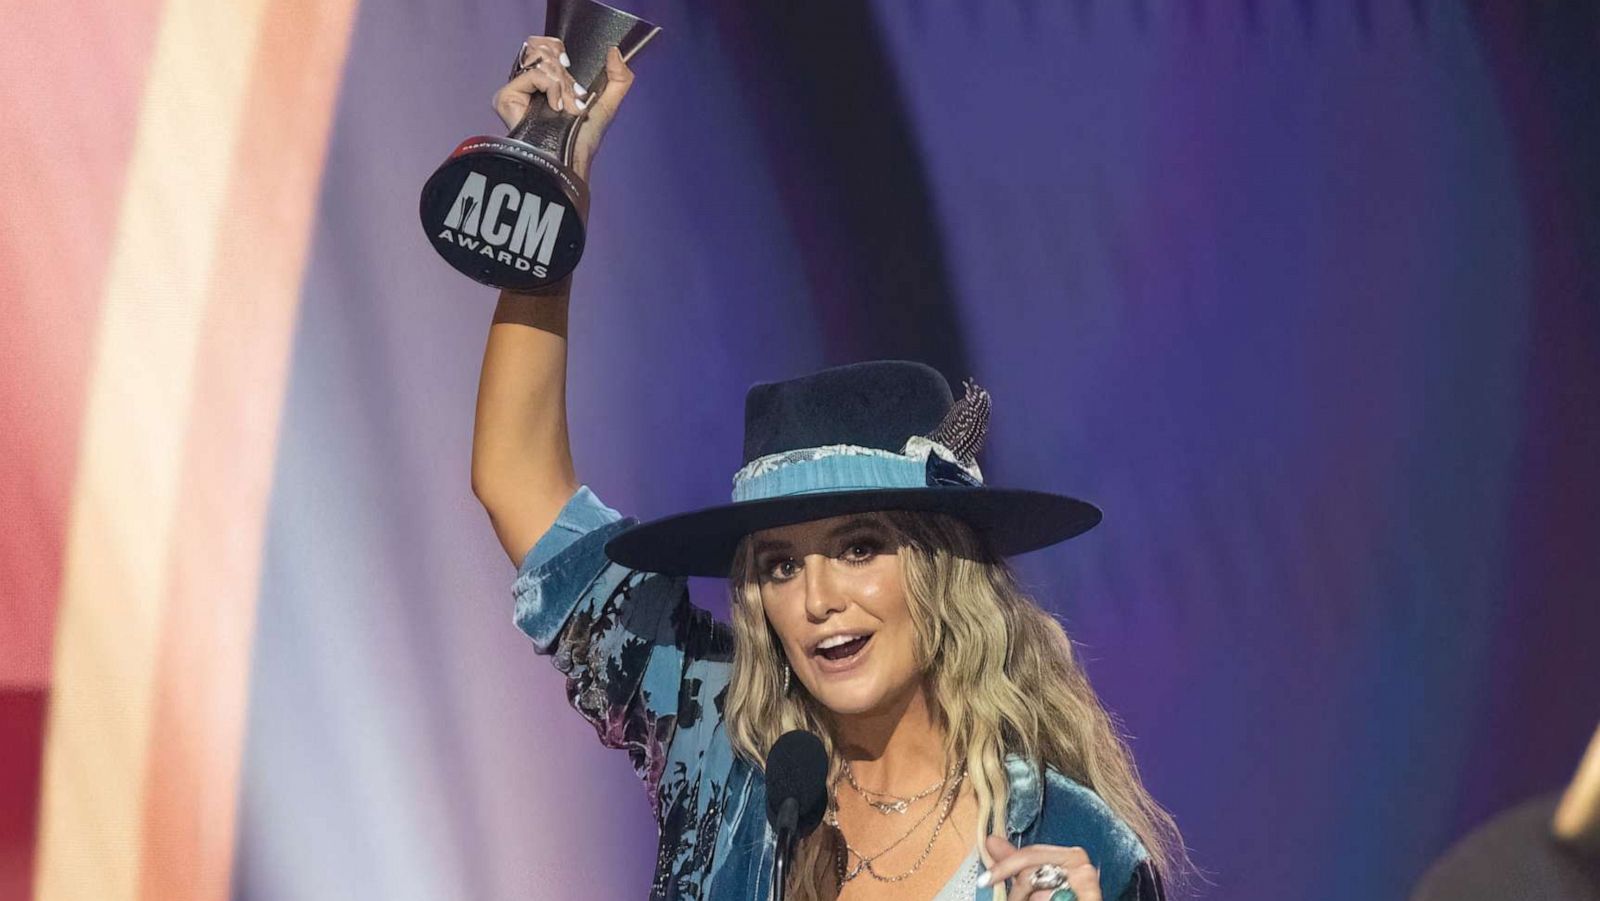 ACM Awards 2023: Host, Winners, Date, Time, News - Parade